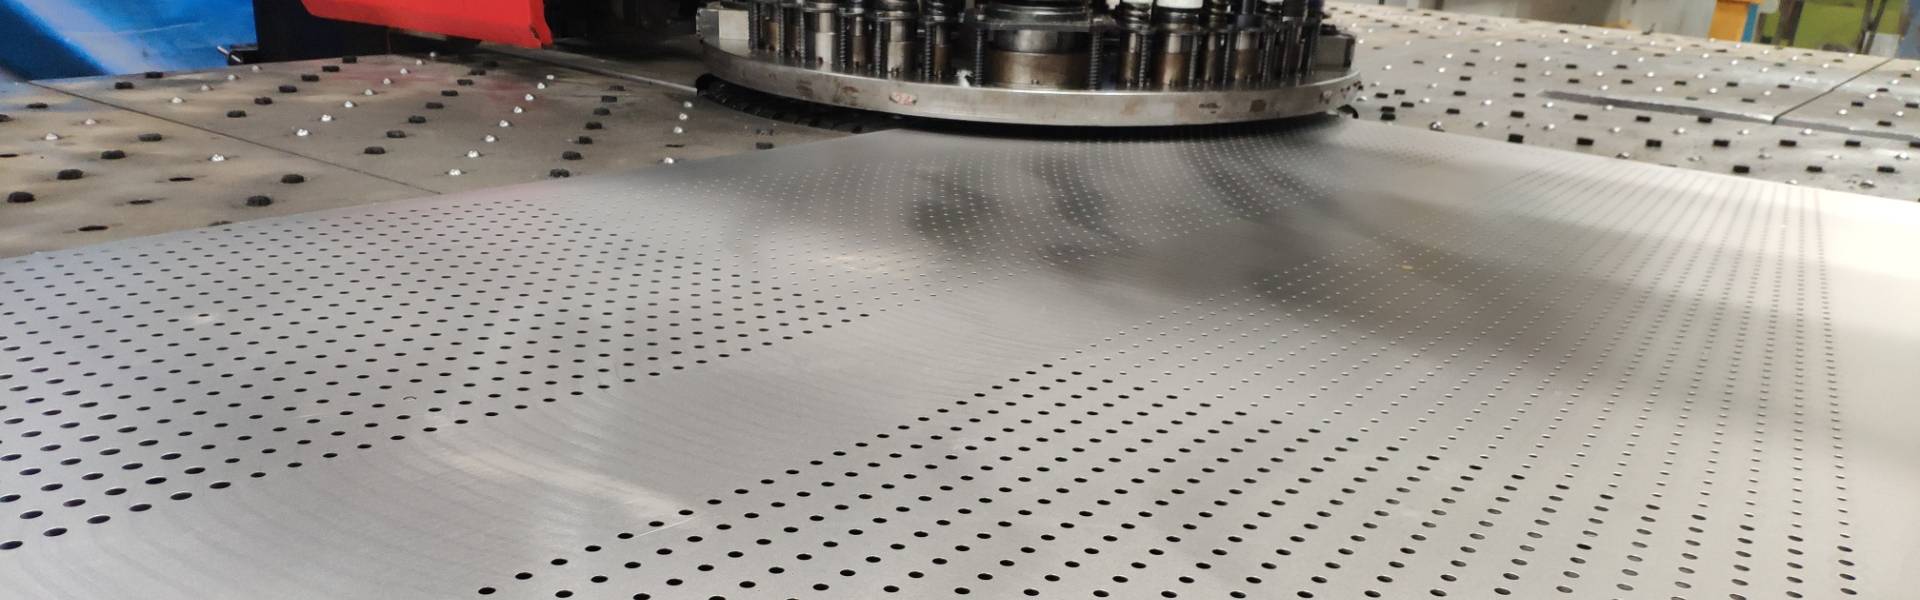 A machine is producing perforated mesh sheets.